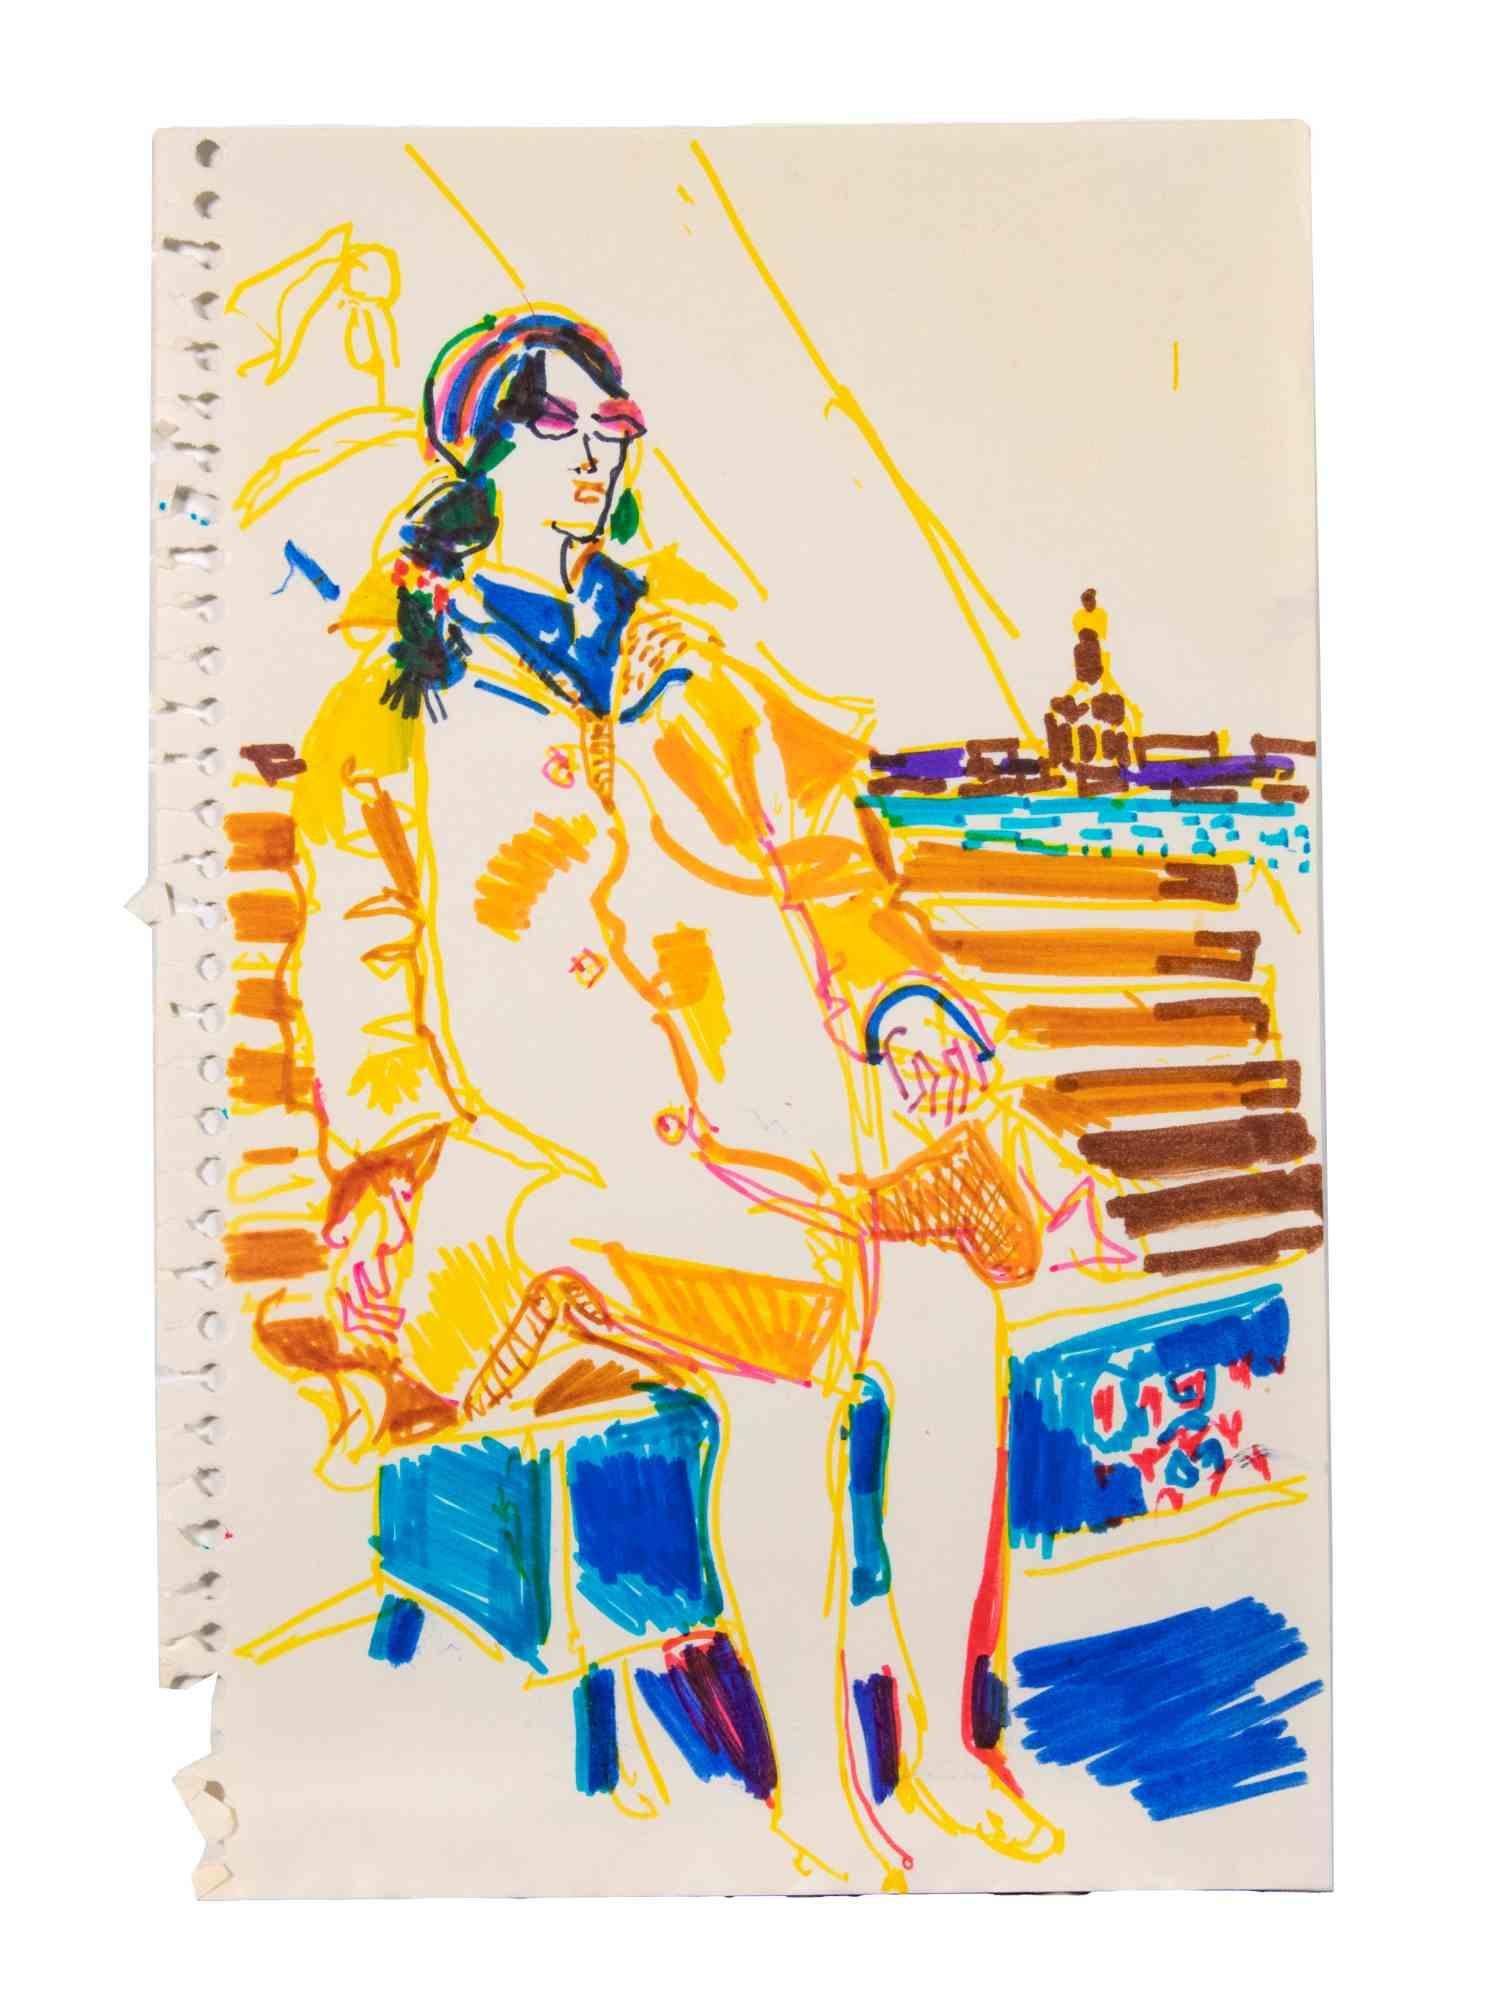 Girl is a Color Markers Drawing realized by  Reynold Arnould  (Le Havre 1919 - Parigi 1980).

Good condition on a little sheet of a notebook.

No signature.

Reynold Arnould was born in Le Havre, France in 1919. He studied at l'École des Beaux-Arts